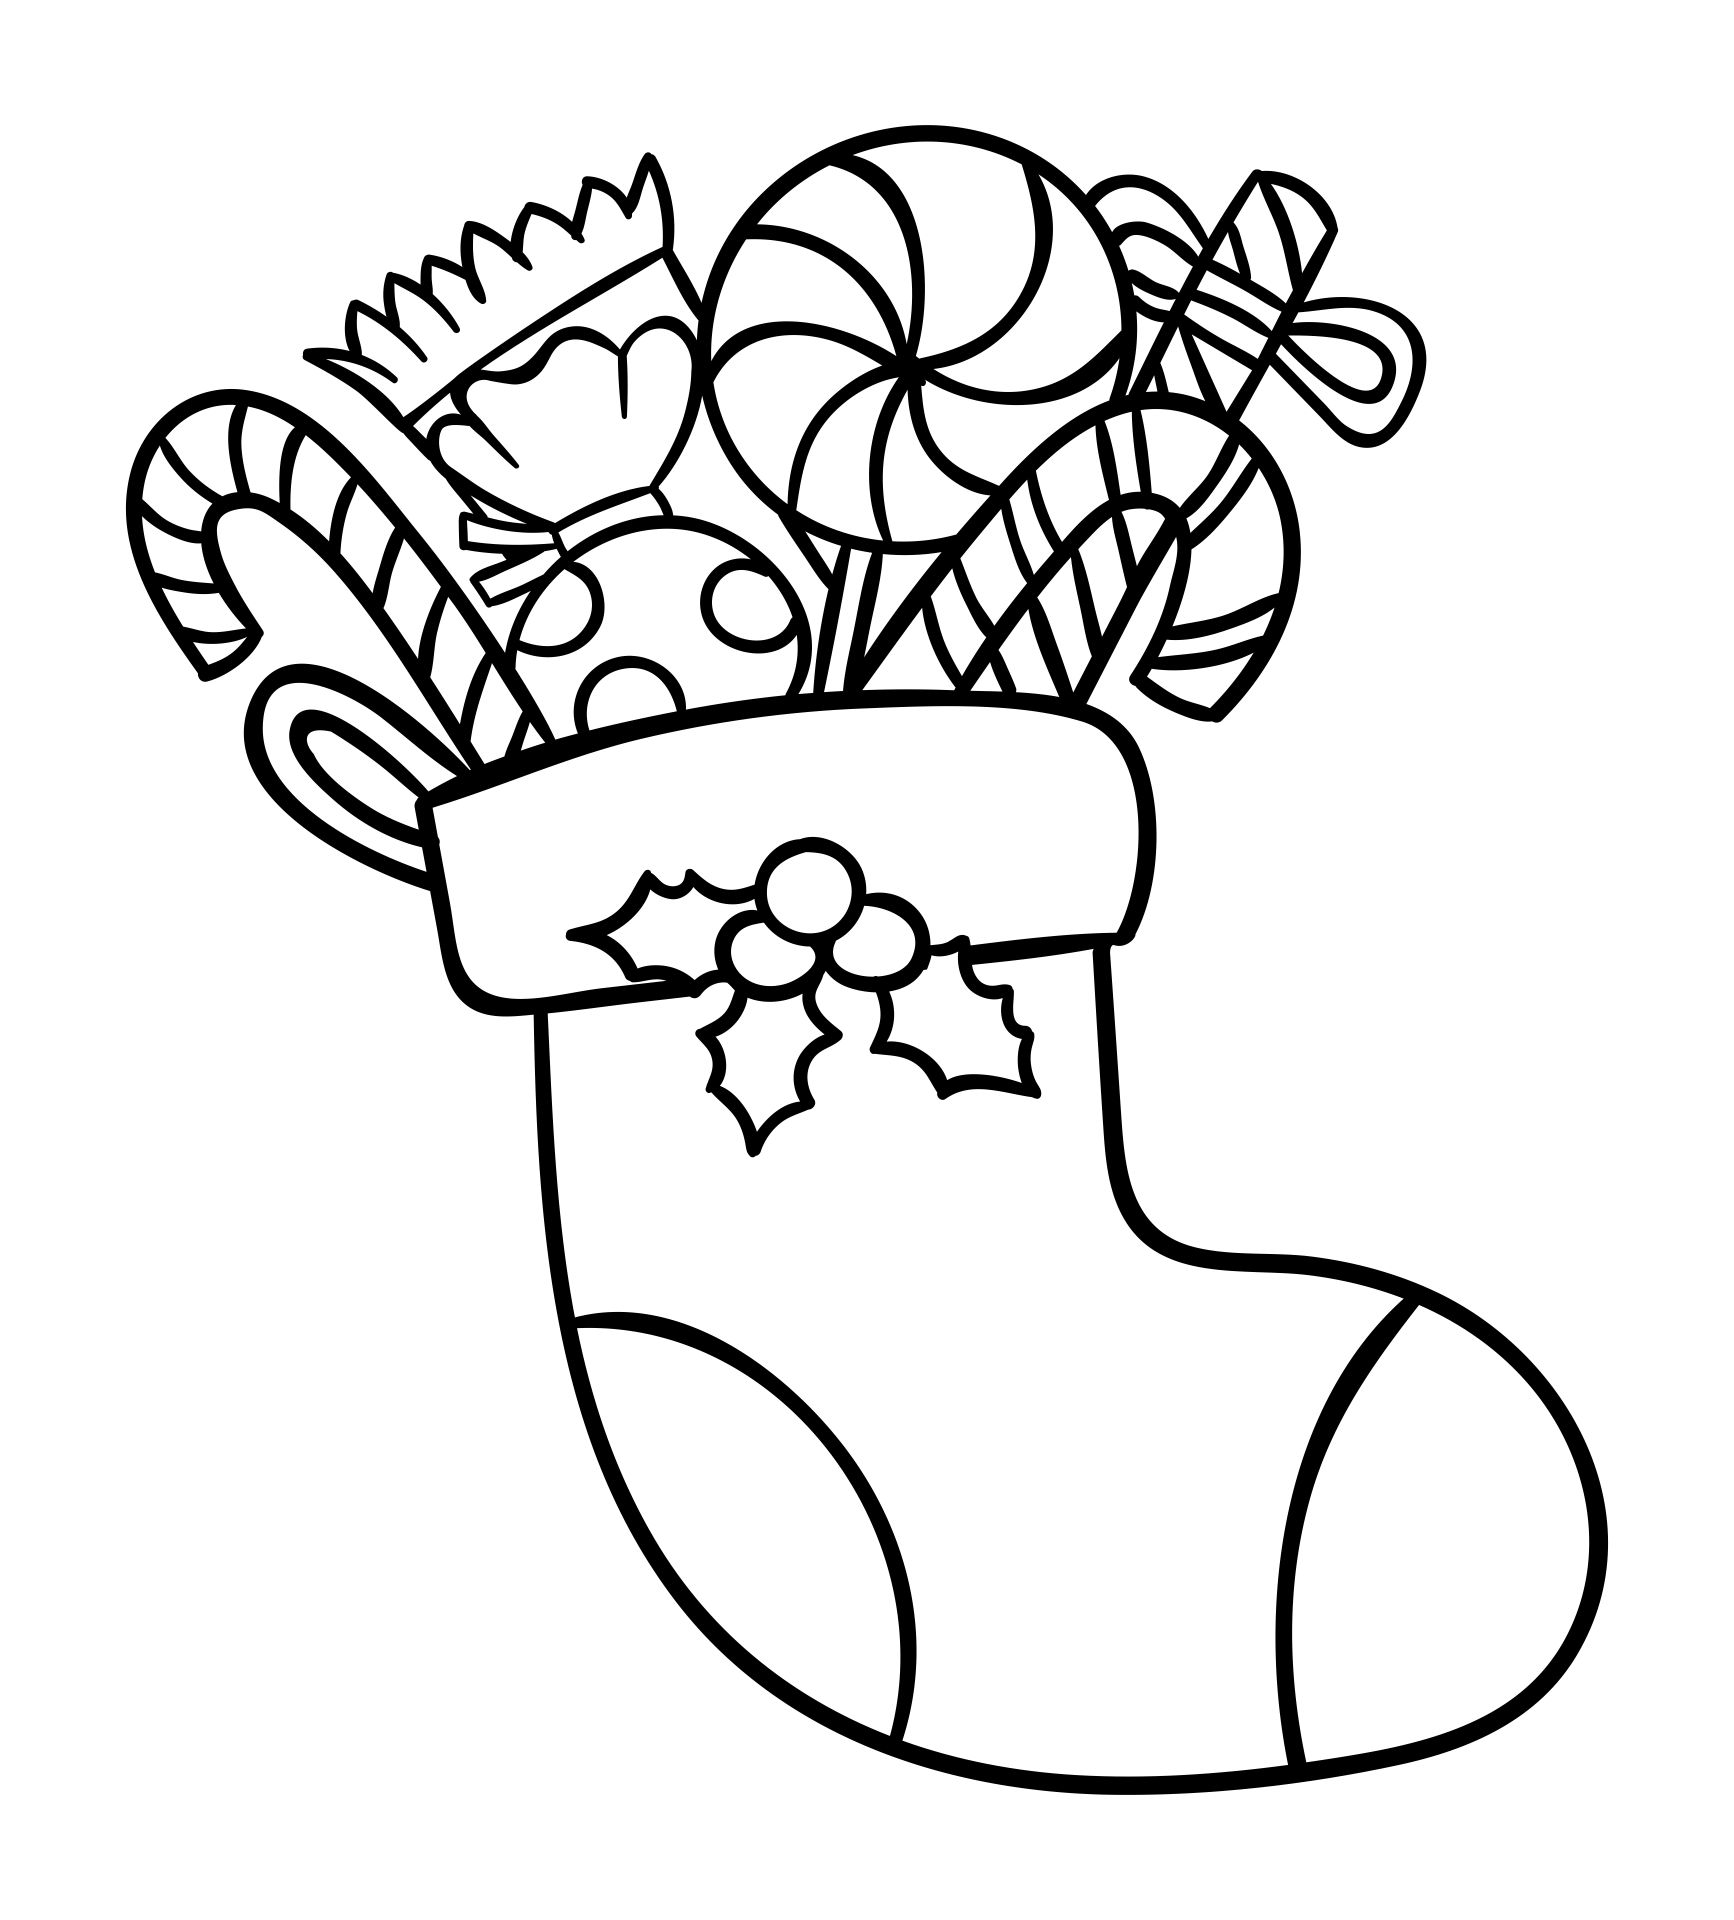 15 Best Christmas Stocking Coloring Pages Printable